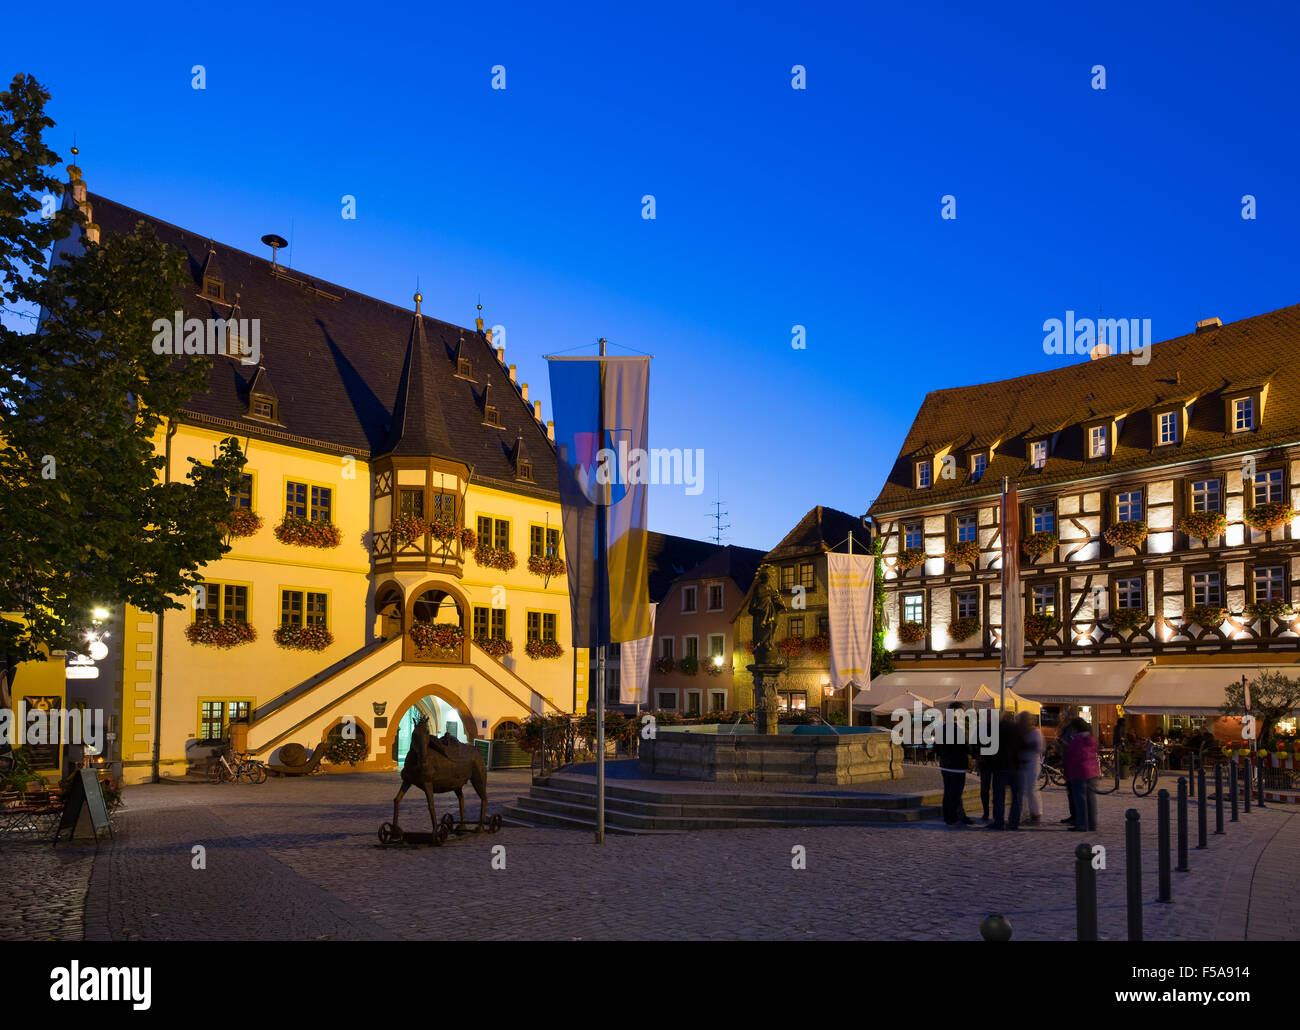 Market square, town hall and Hotel Behringer at dusk, Volkach, Franconia, Lower Franconia, Franconia, Bavaria, Germany Stock Photo